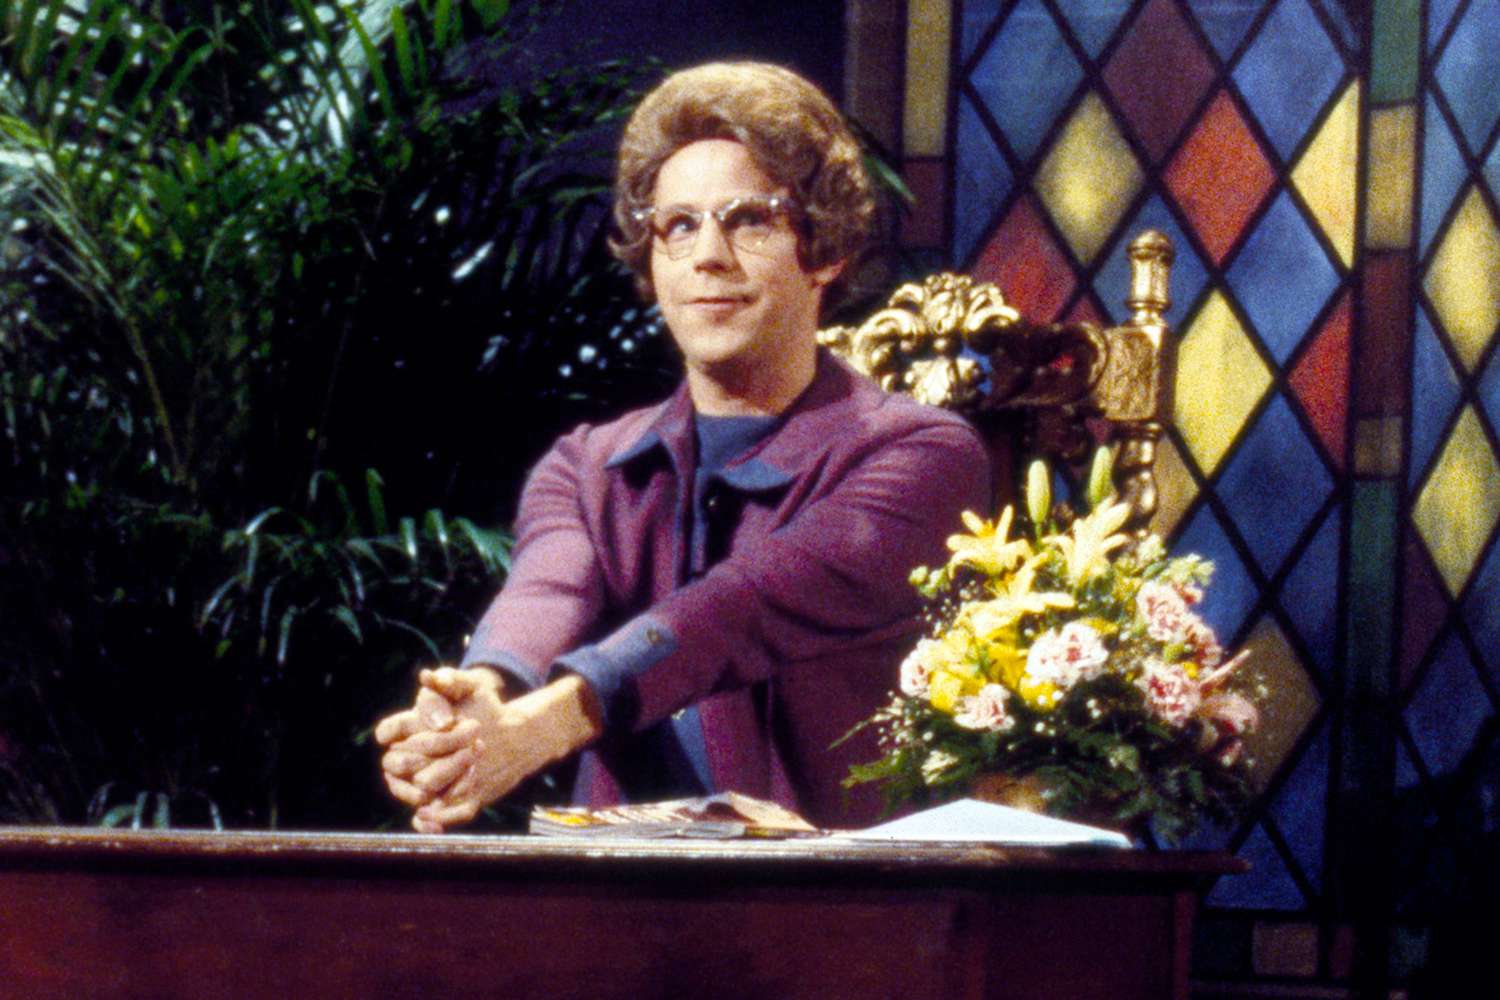 SATURDAY NIGHT LIVE -- Episode 6 -- Pictured: Dana Carvey as Church Lady